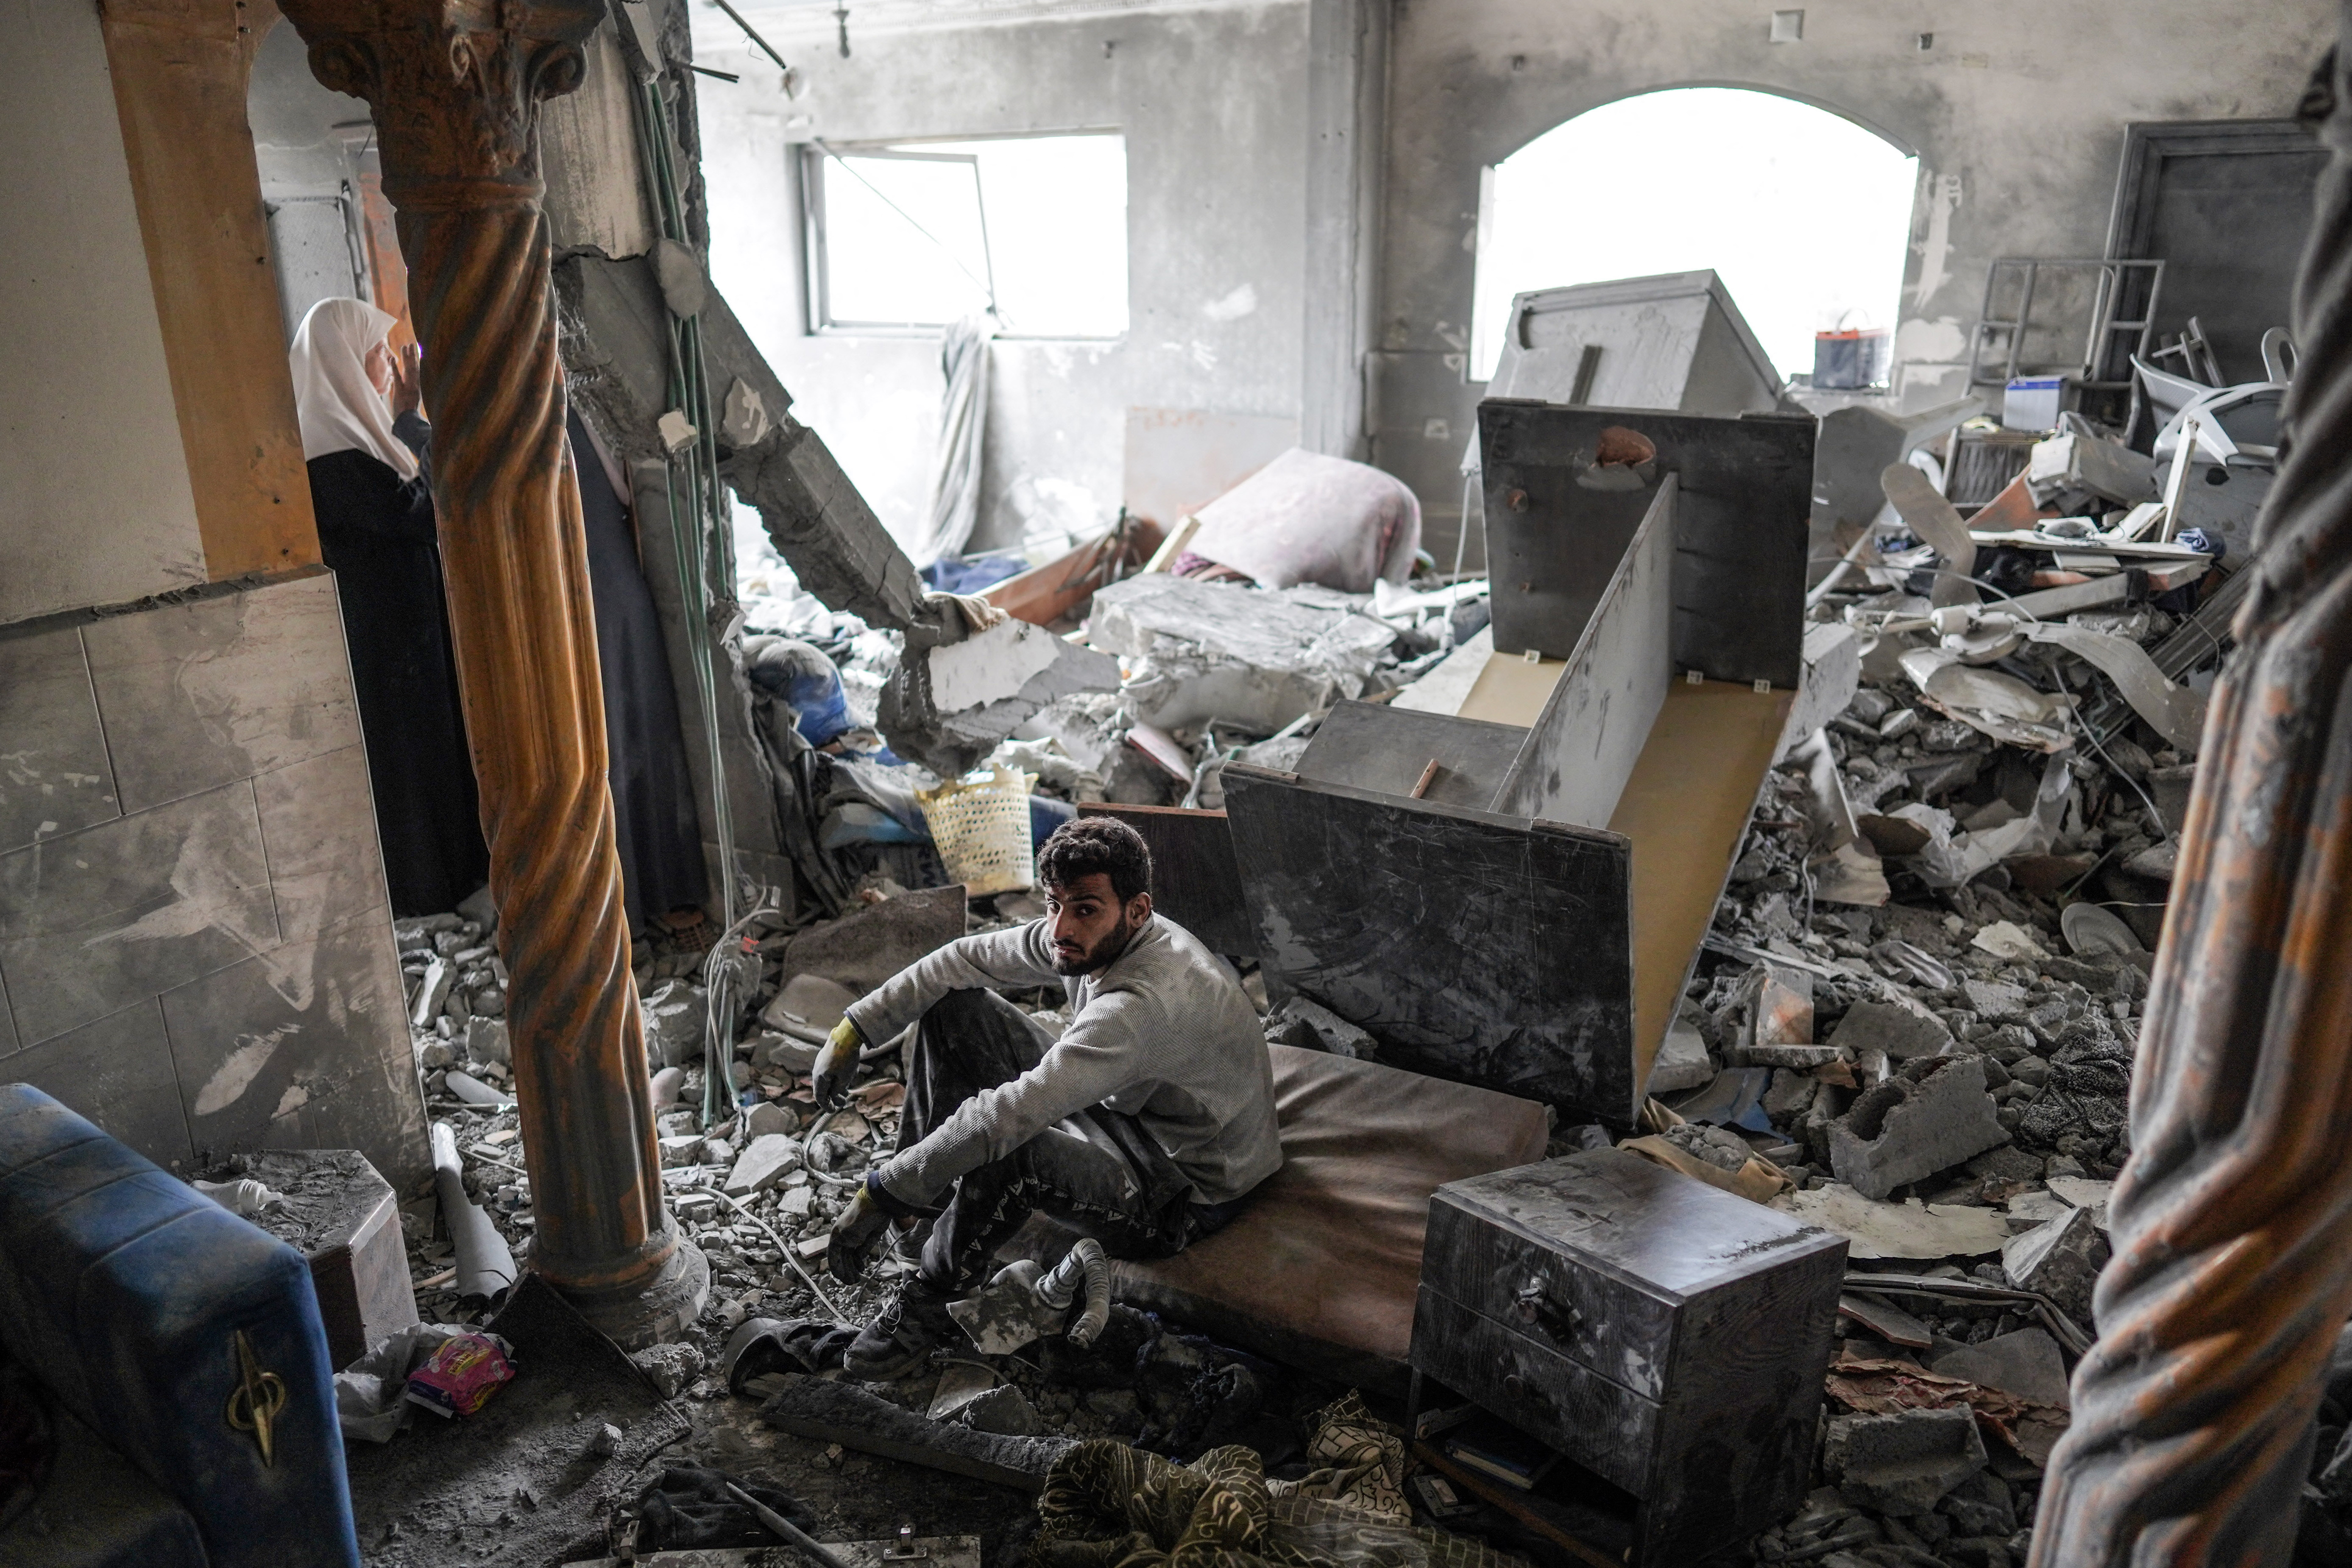 A Palestinian man inspects the rubble in a house, following Israeli bombardment